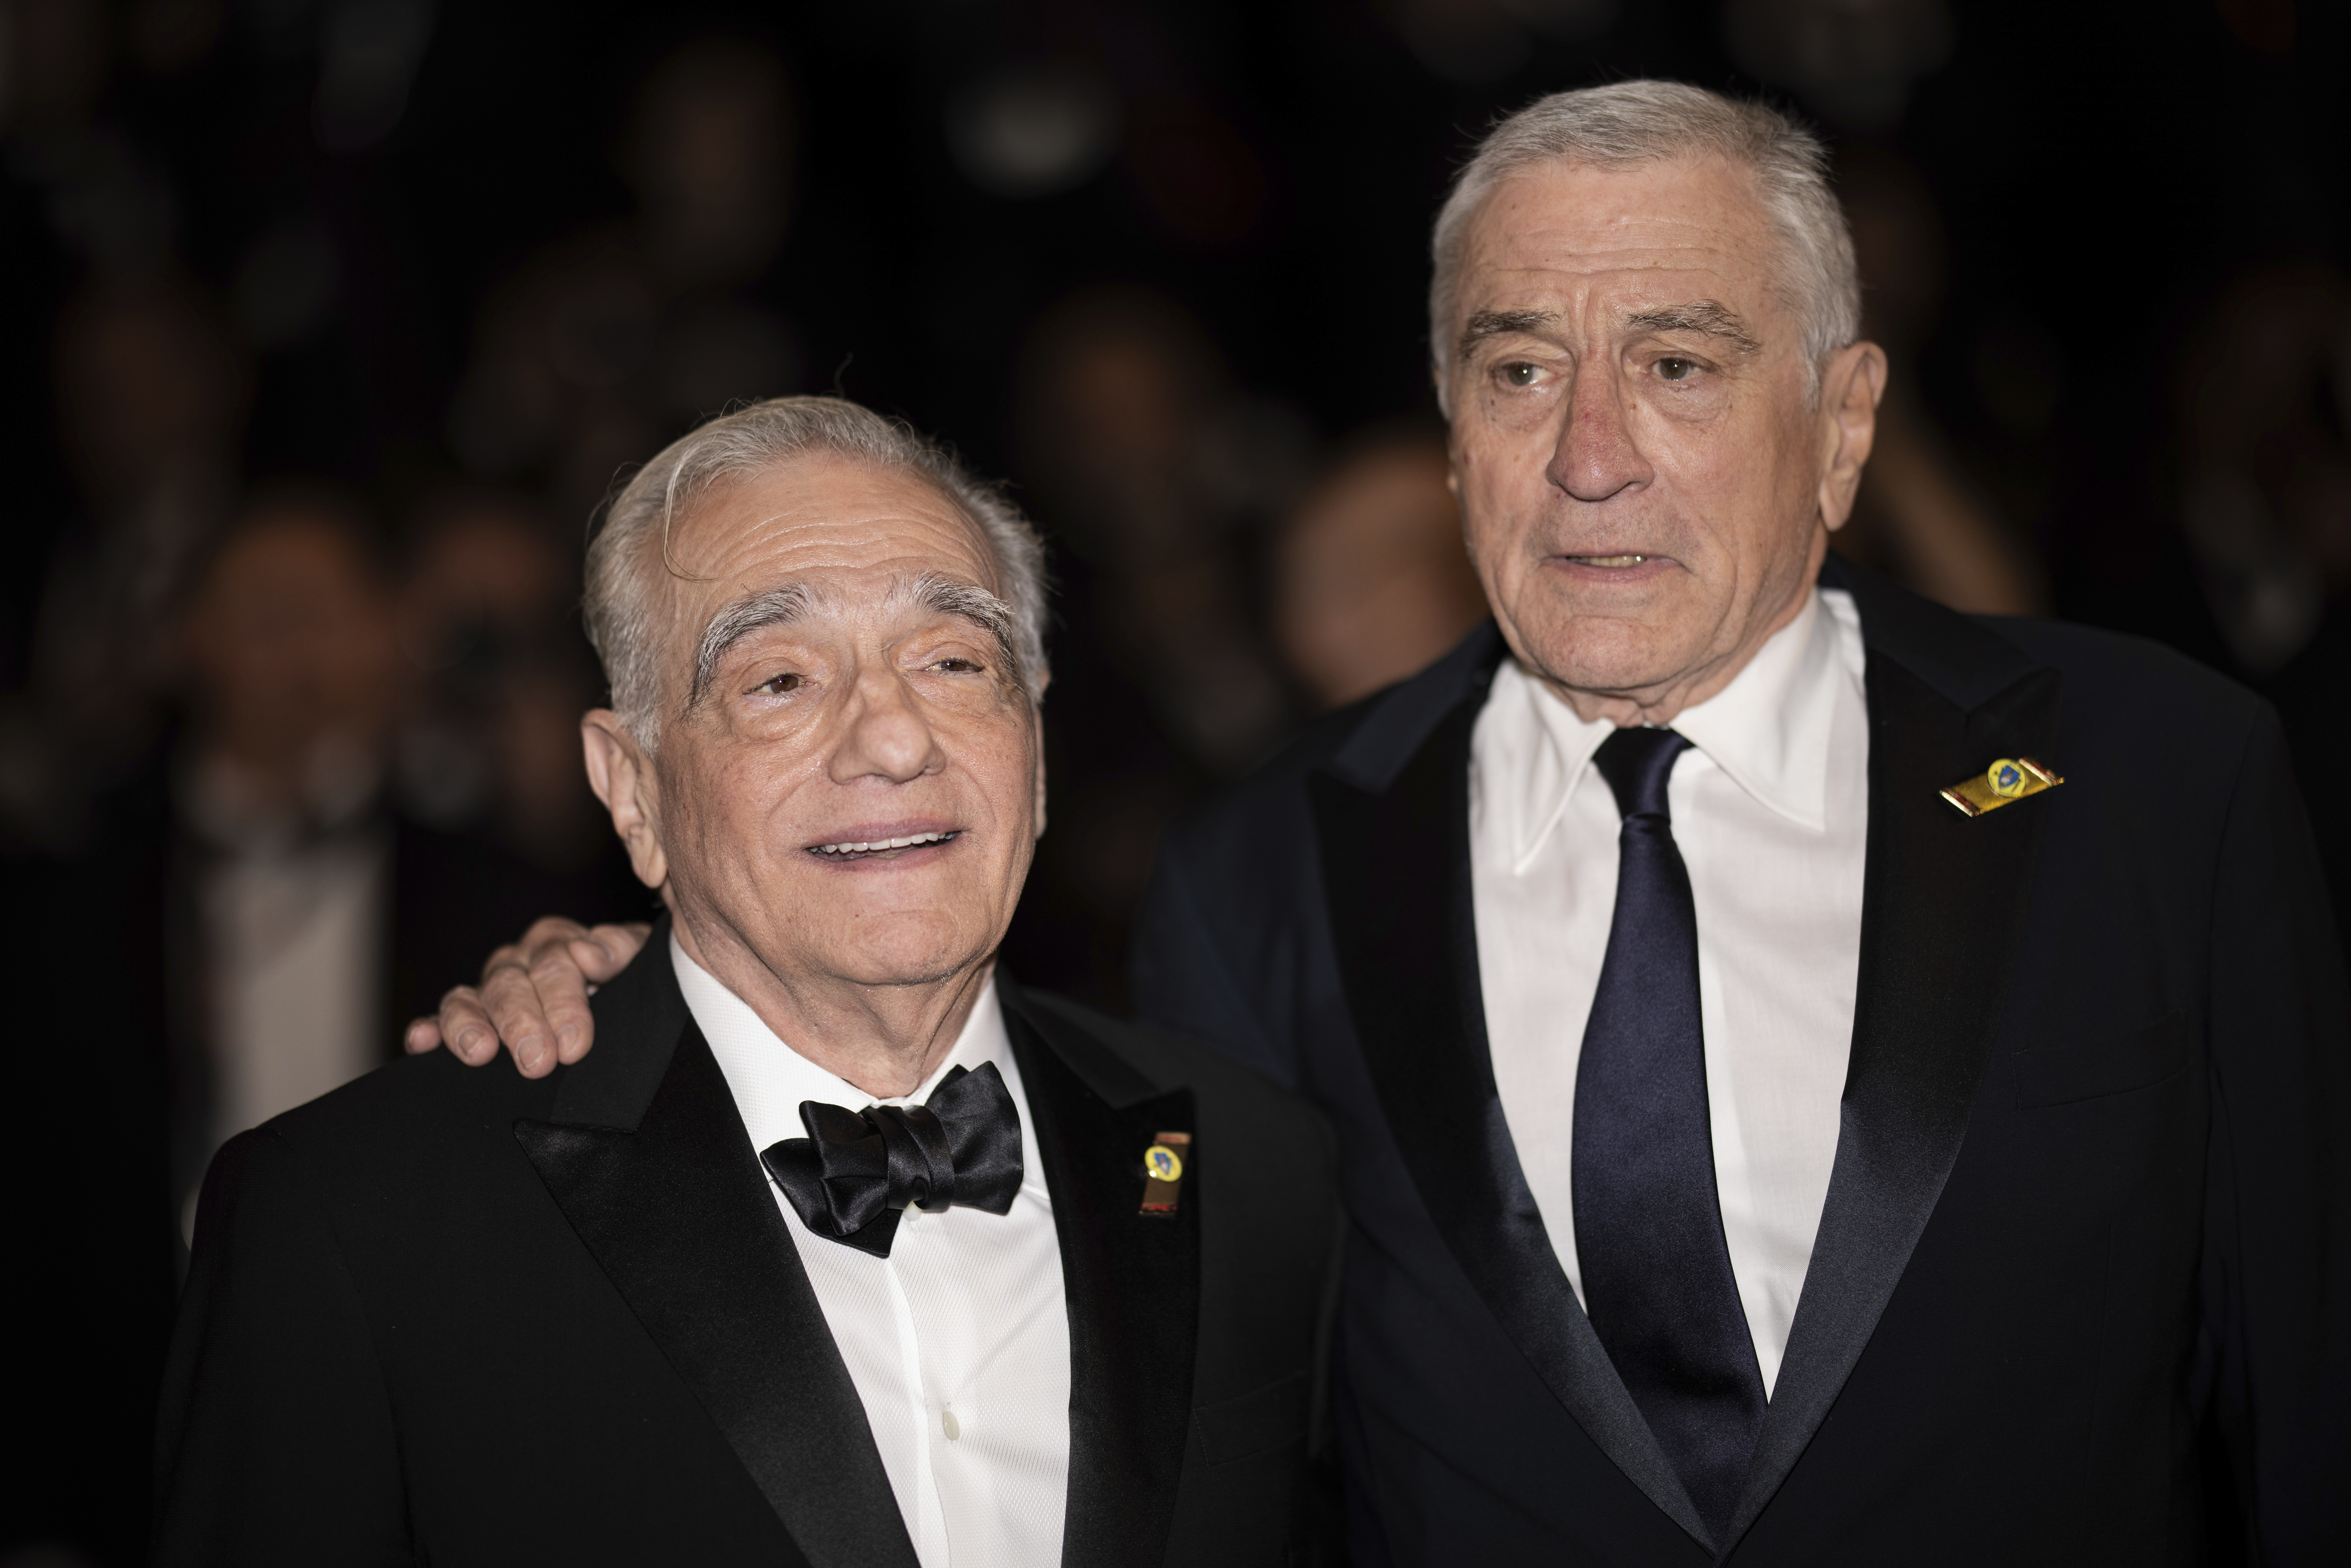 Director Martin Scorsese, left, and Robert De Niro pose for photographers upon departure from the premiere of the film 'Killers of the Flower Moon' at the 76th international film festival, Cannes, southern France, Saturday, May 20, 2023. (Photo by Vianney Le Caer/Invision/AP)